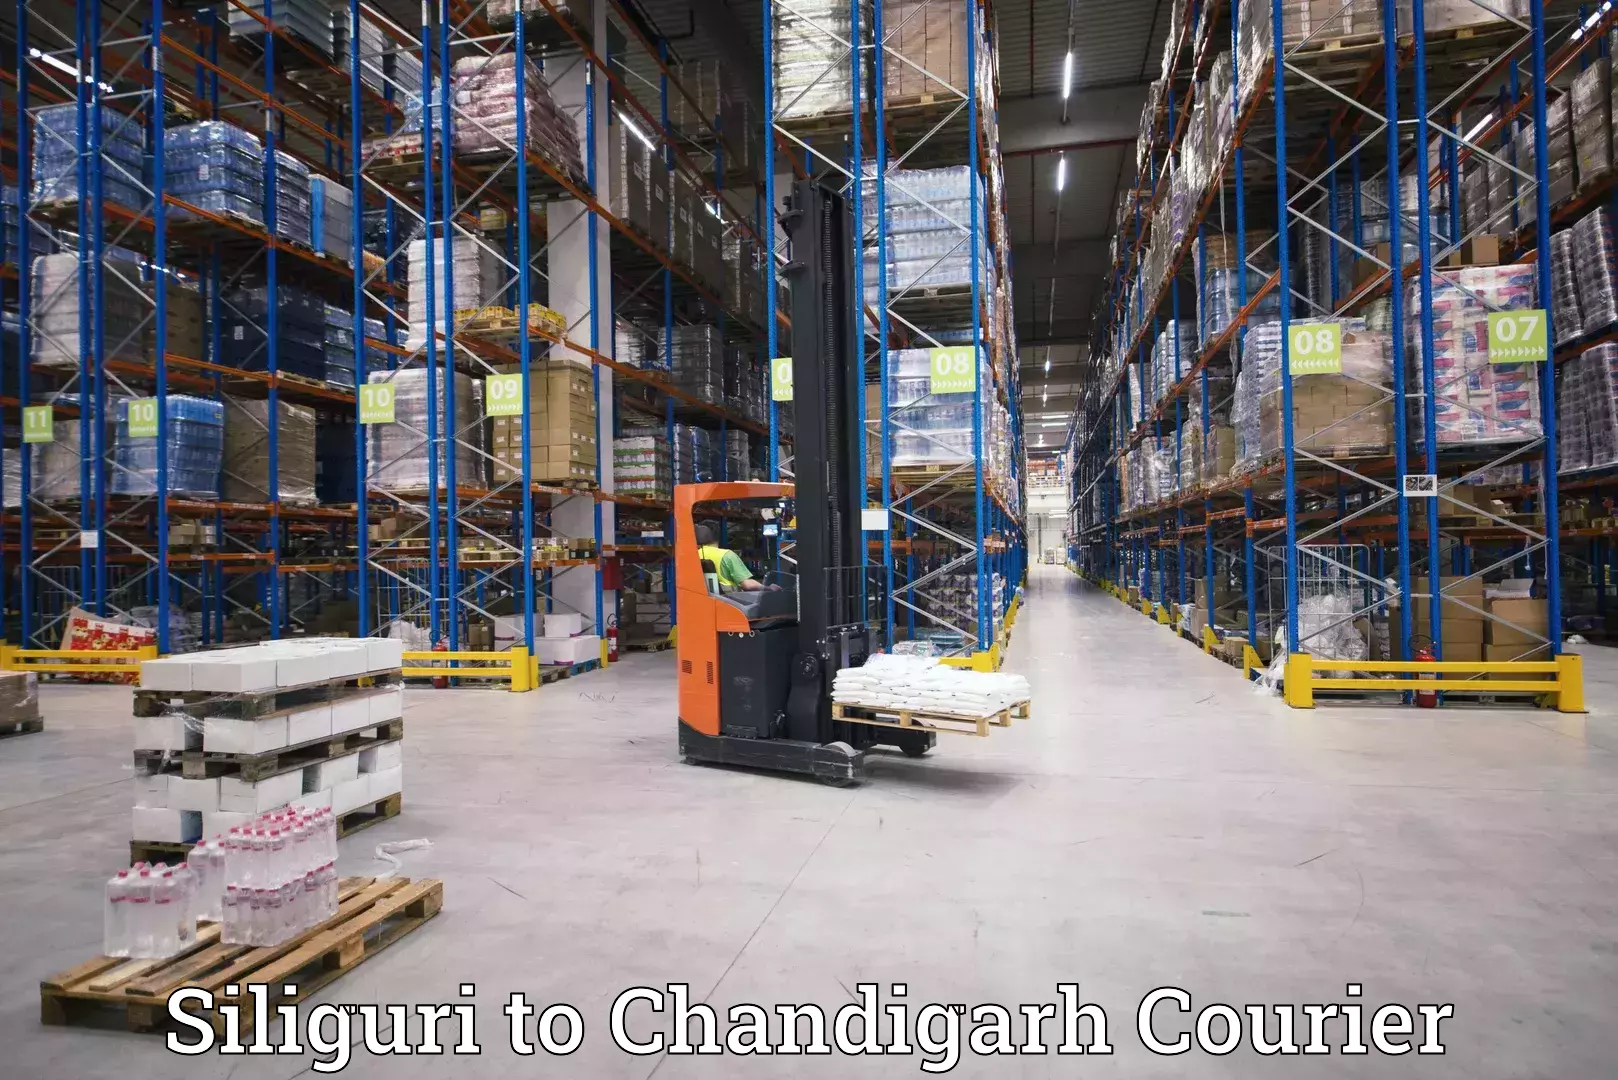 Trackable shipping service Siliguri to Chandigarh